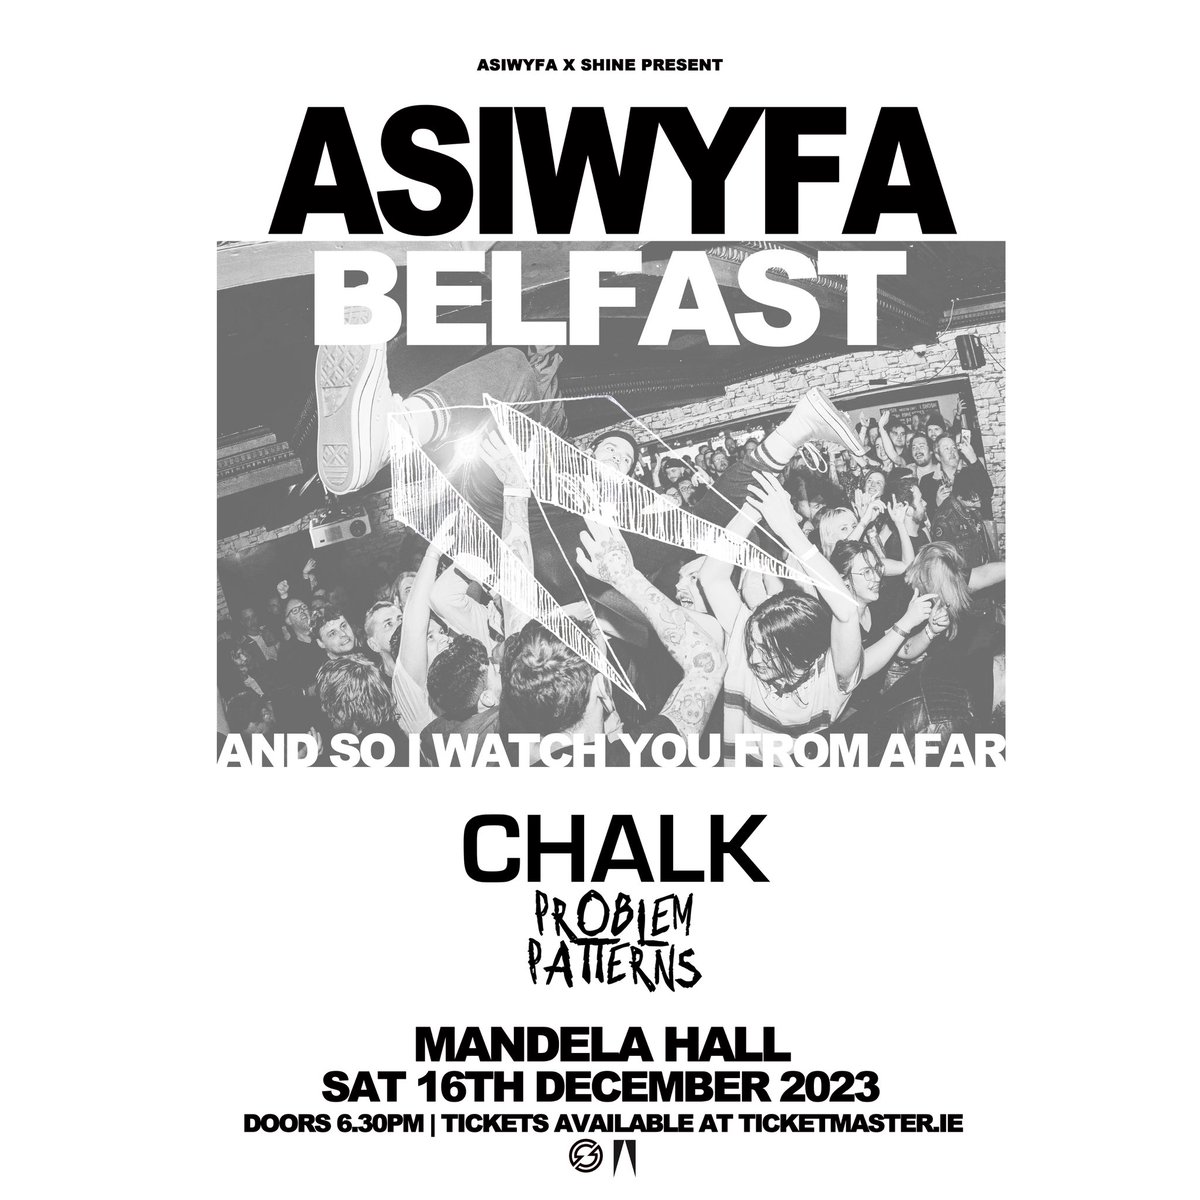 𝐂𝐎𝐌𝐈𝐍𝐆 𝐒𝐎𝐎𝐍 ❤️‍🔥 @ASIWYFA_BAND with guests @chalk_band & @probpatterns at Mandela Hall this December 16th! 🎟 Remaining tickets available via: bit.ly/asiwyfa16